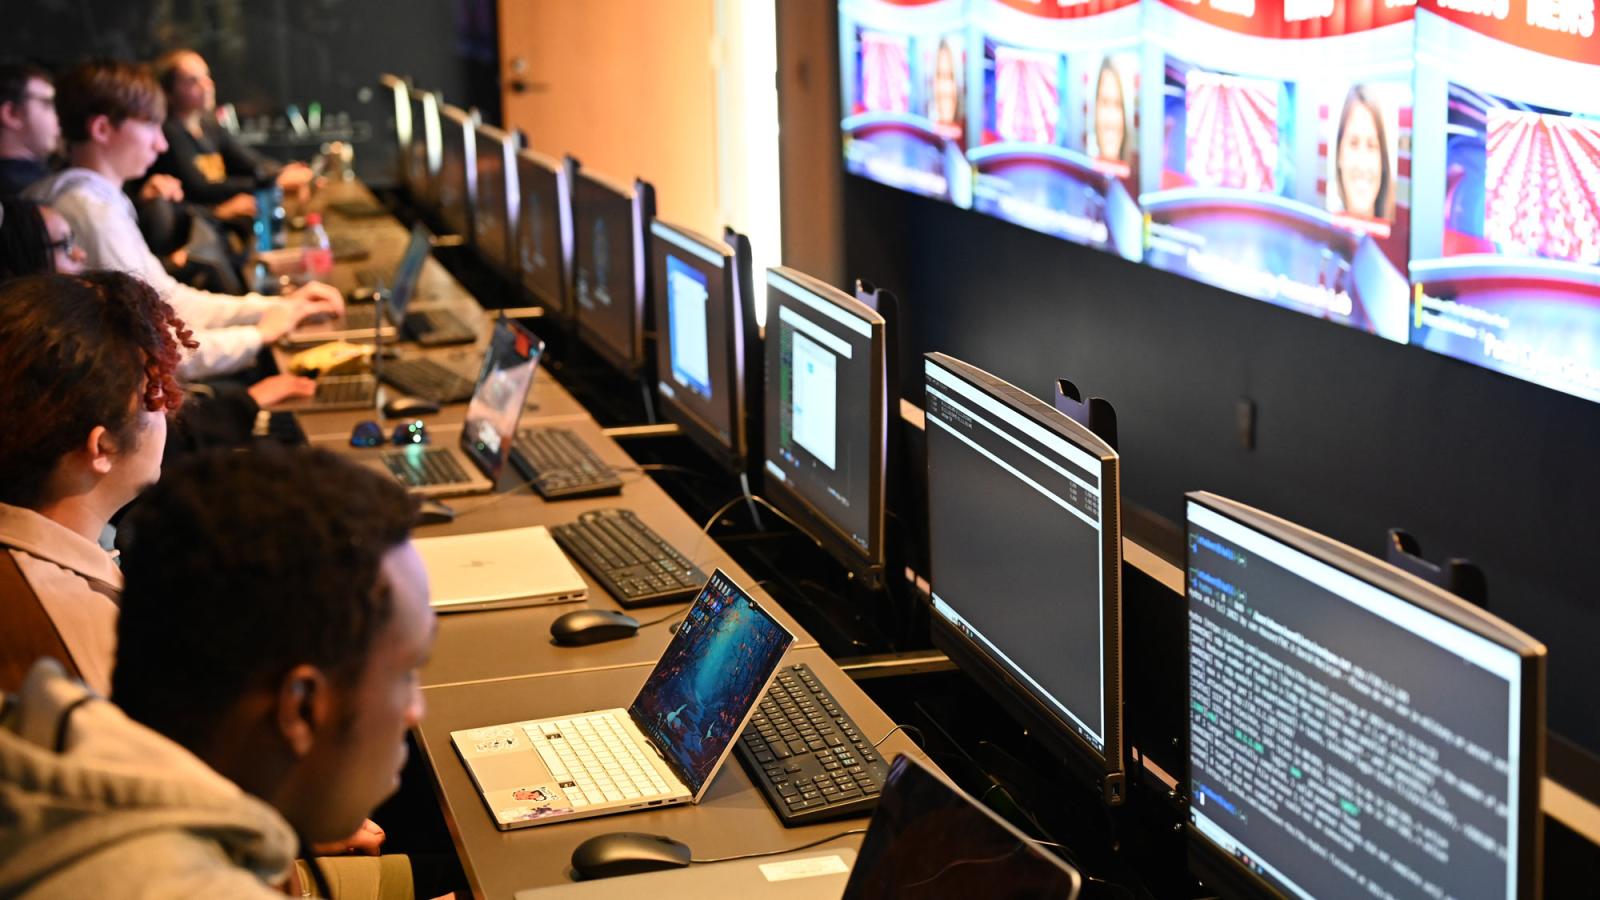 Pace students working in front of a row of computers within the Cyber Range